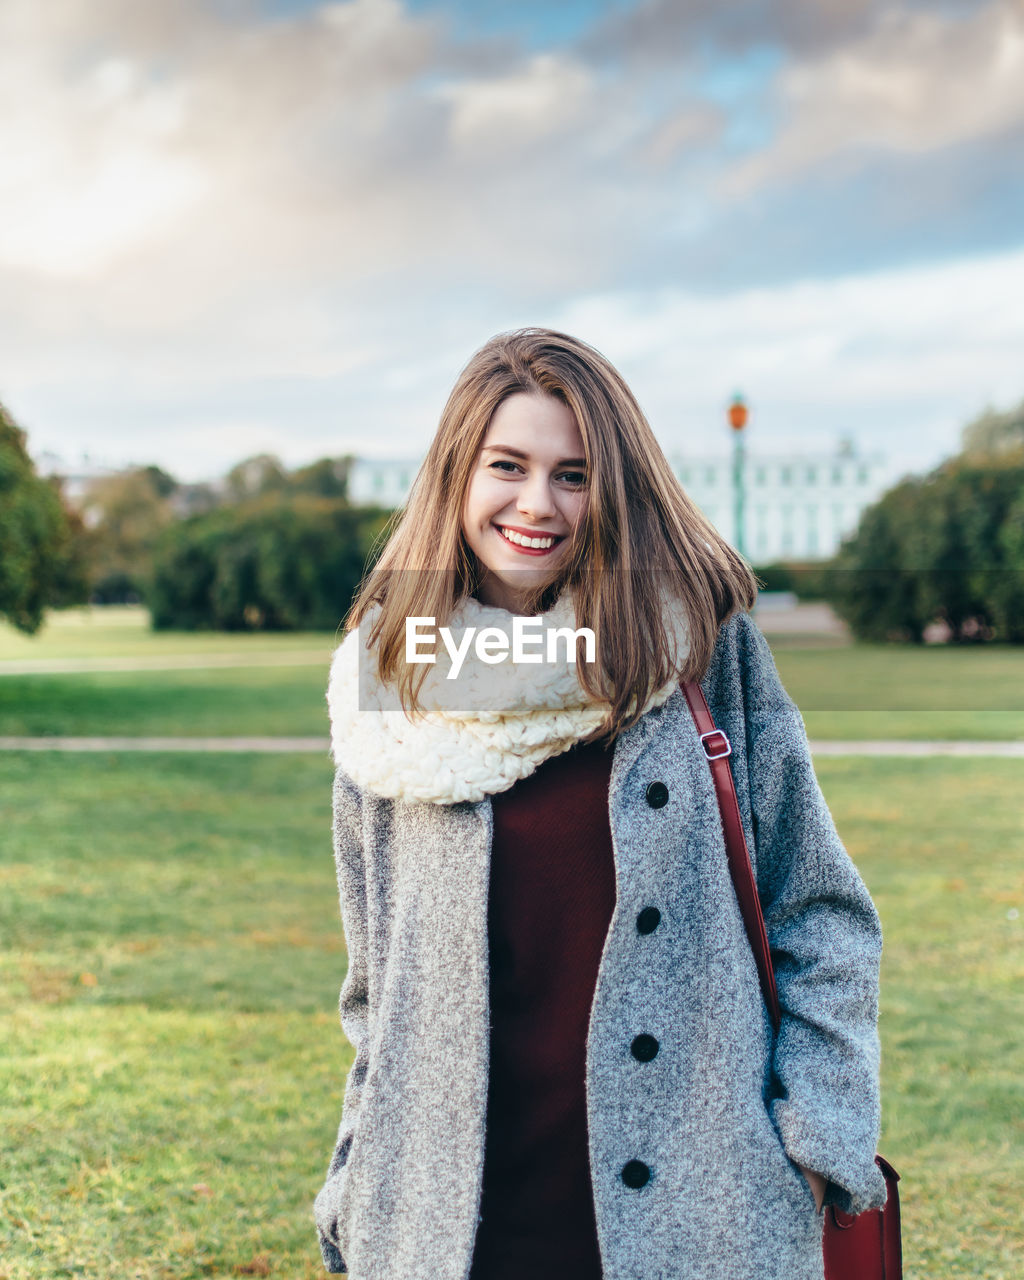 Portrait of smiling young woman in park against sky